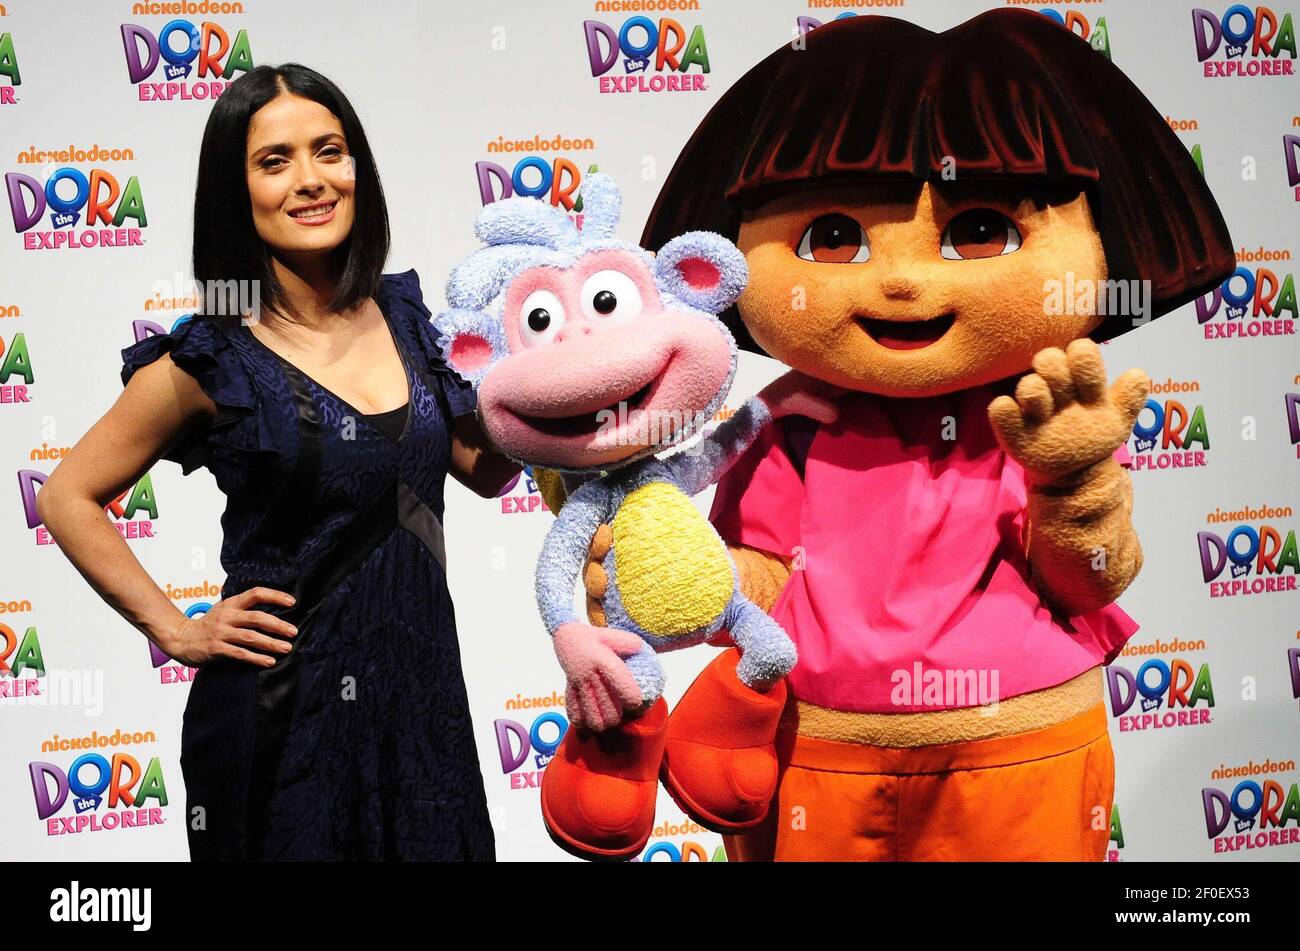 Salma Hayek and Dora The Explorer. 2 March 2010, Burbank, CA. Nickelodeon  Launches Dora The Explorer's 10th Anniversary With The 'Beyond The  Backpack' Campaign held at the Nickelodeon Animation Studio. Photo Credit: